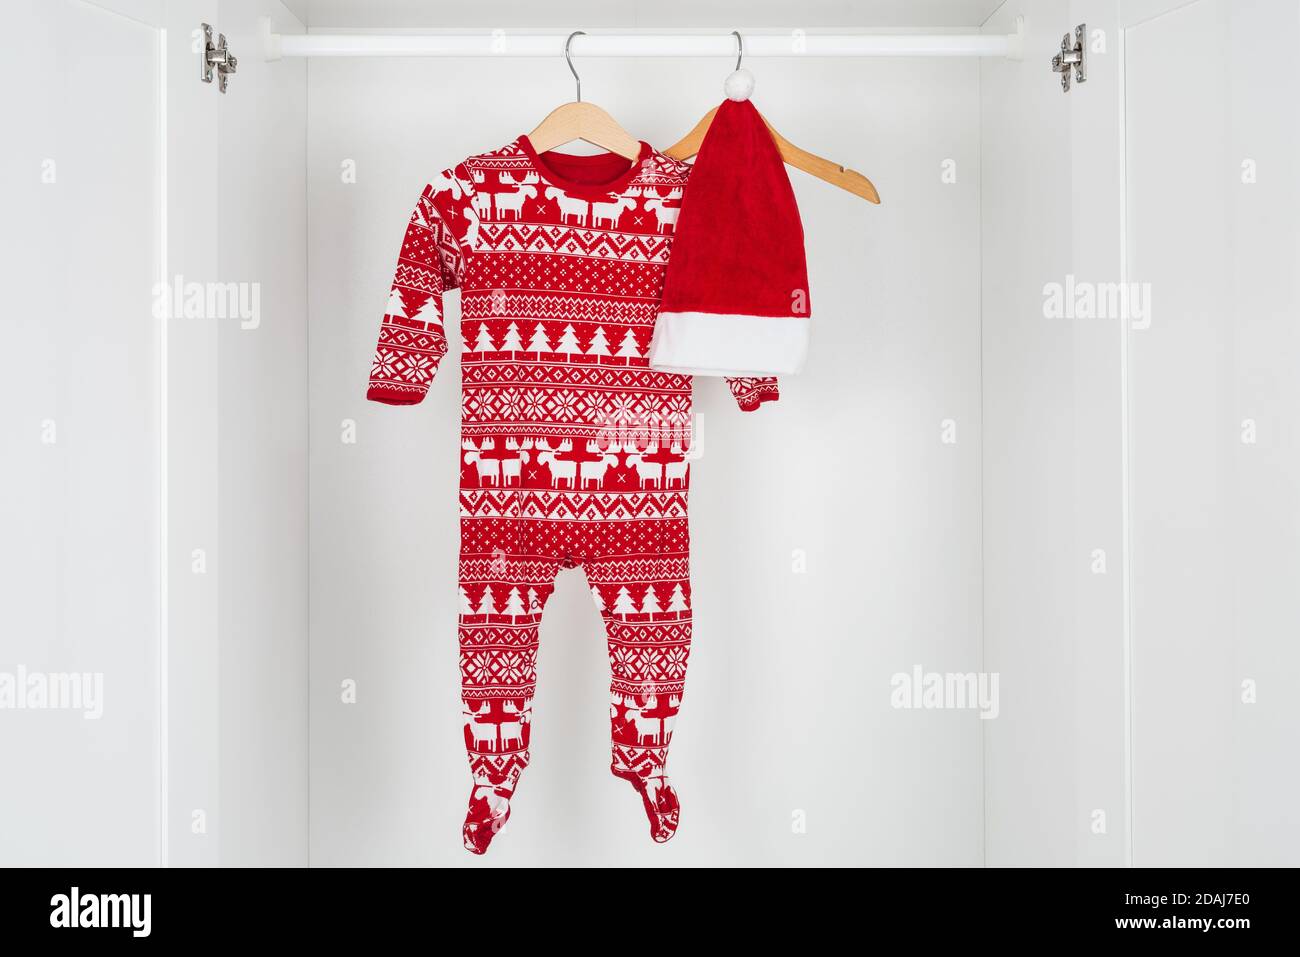 Horizontal color image with a front view of a white and red christmas hat and pajamas hanged on a wooden hangers in the middle of a white closet. Stock Photo